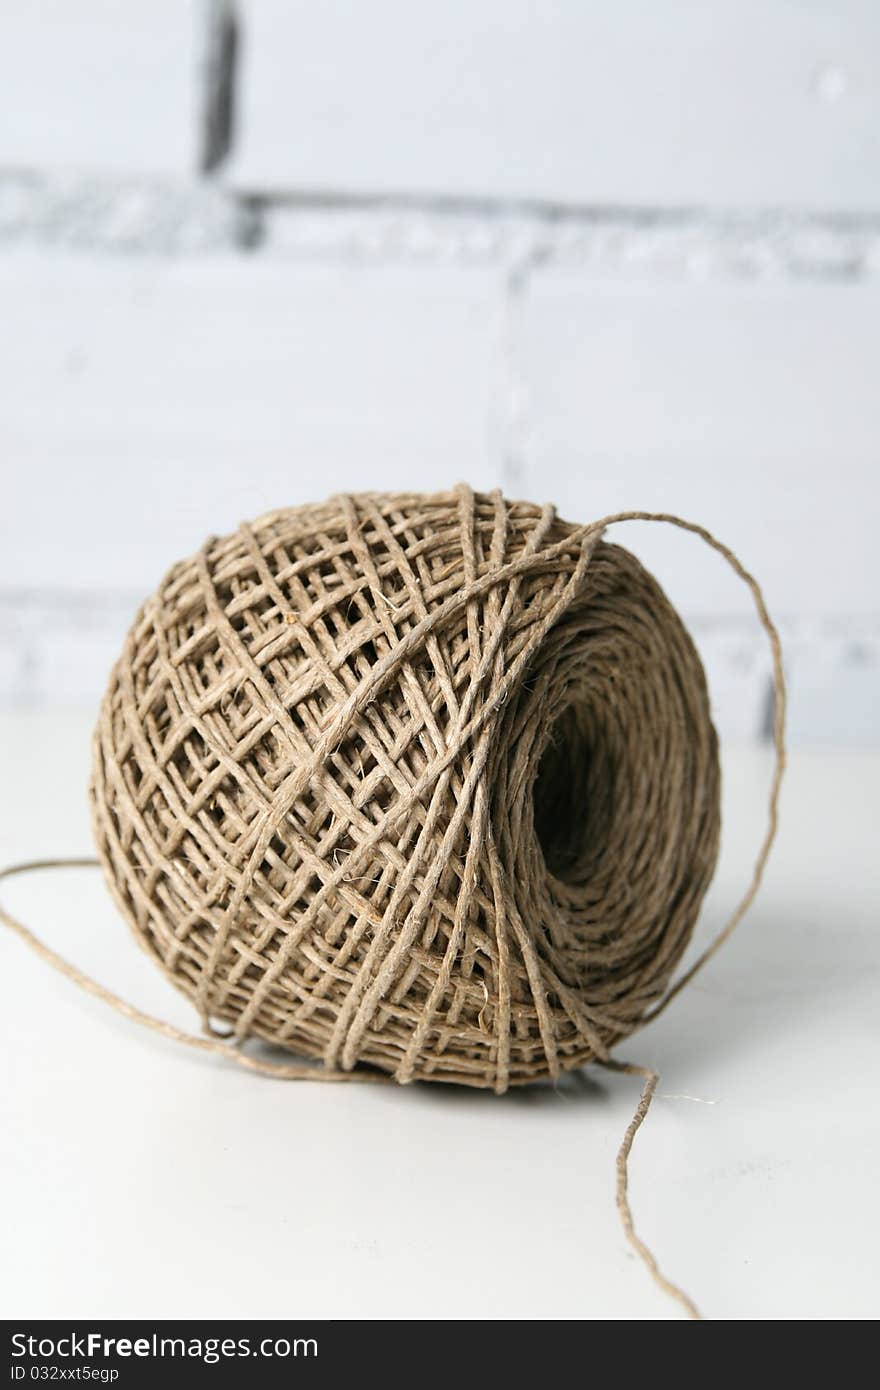 A ball of crude string